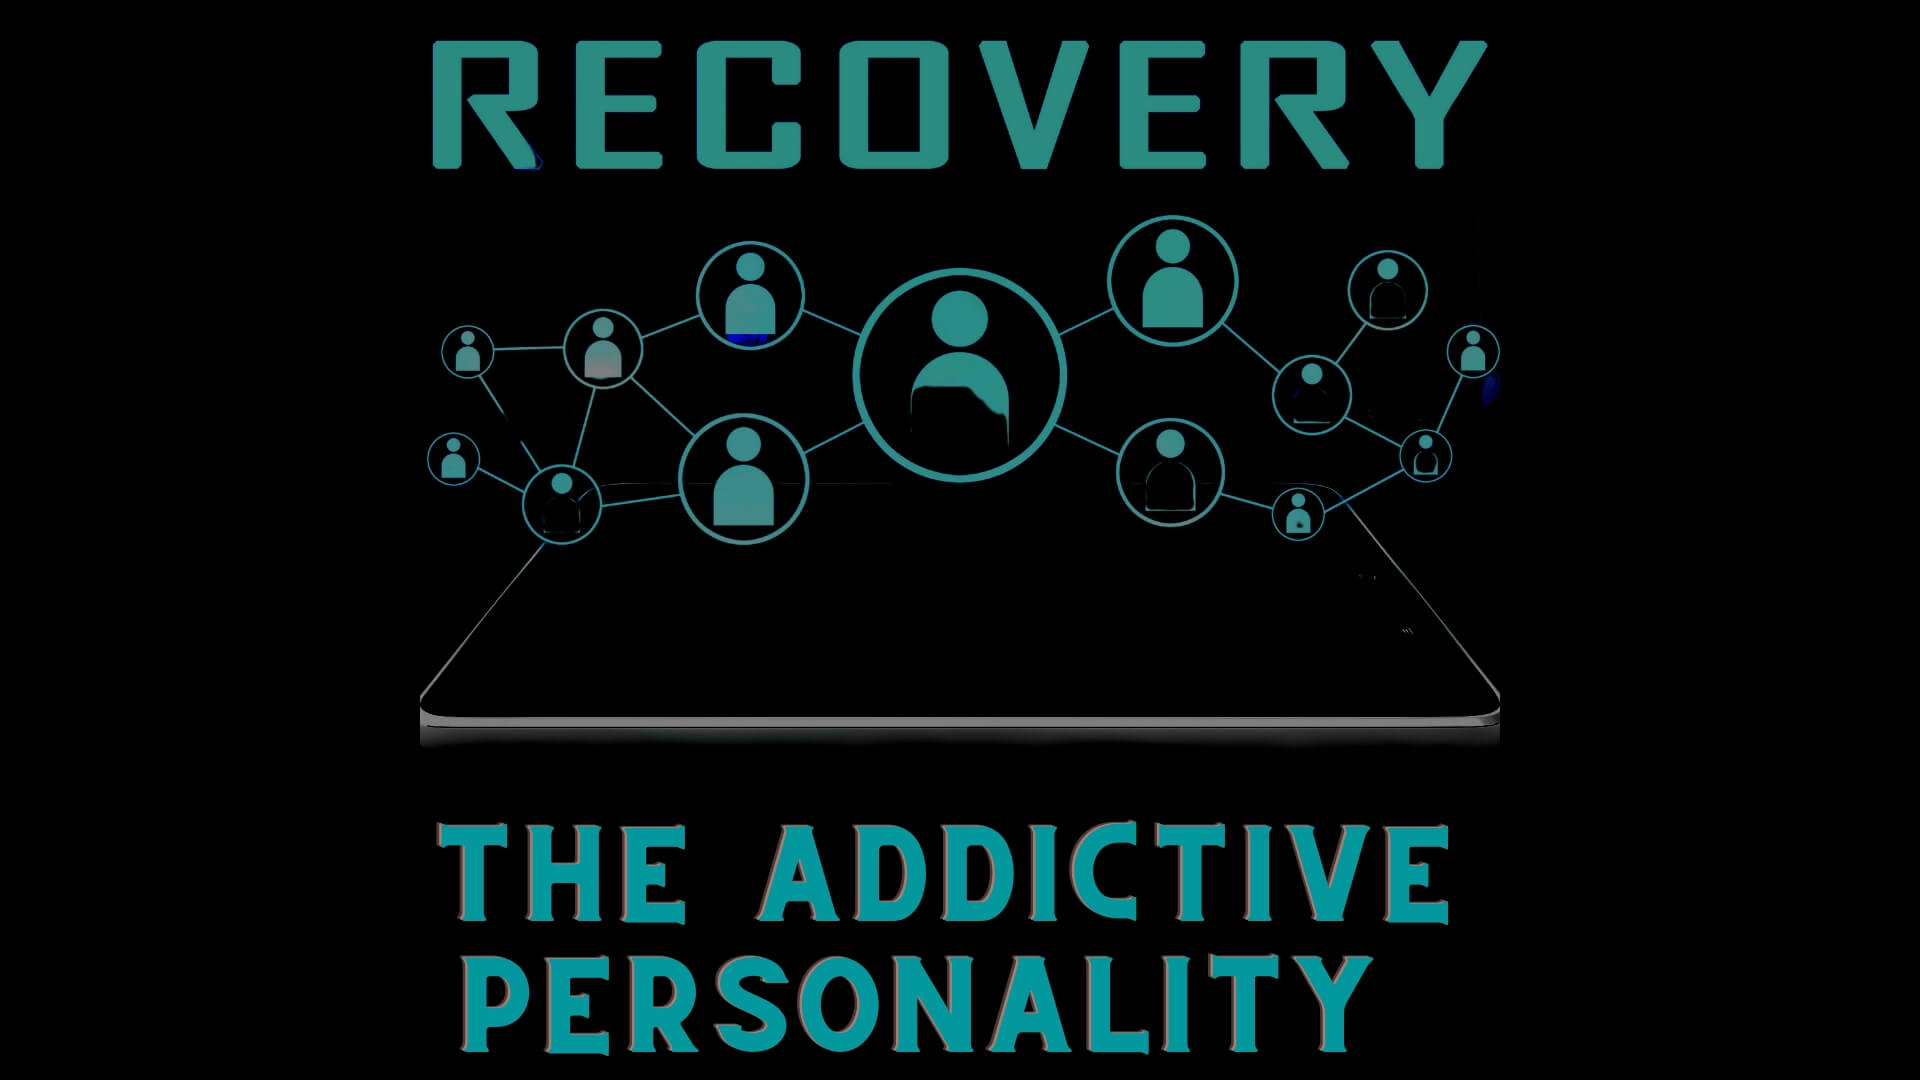 The Addictive Personality and how to Channel it Positively.